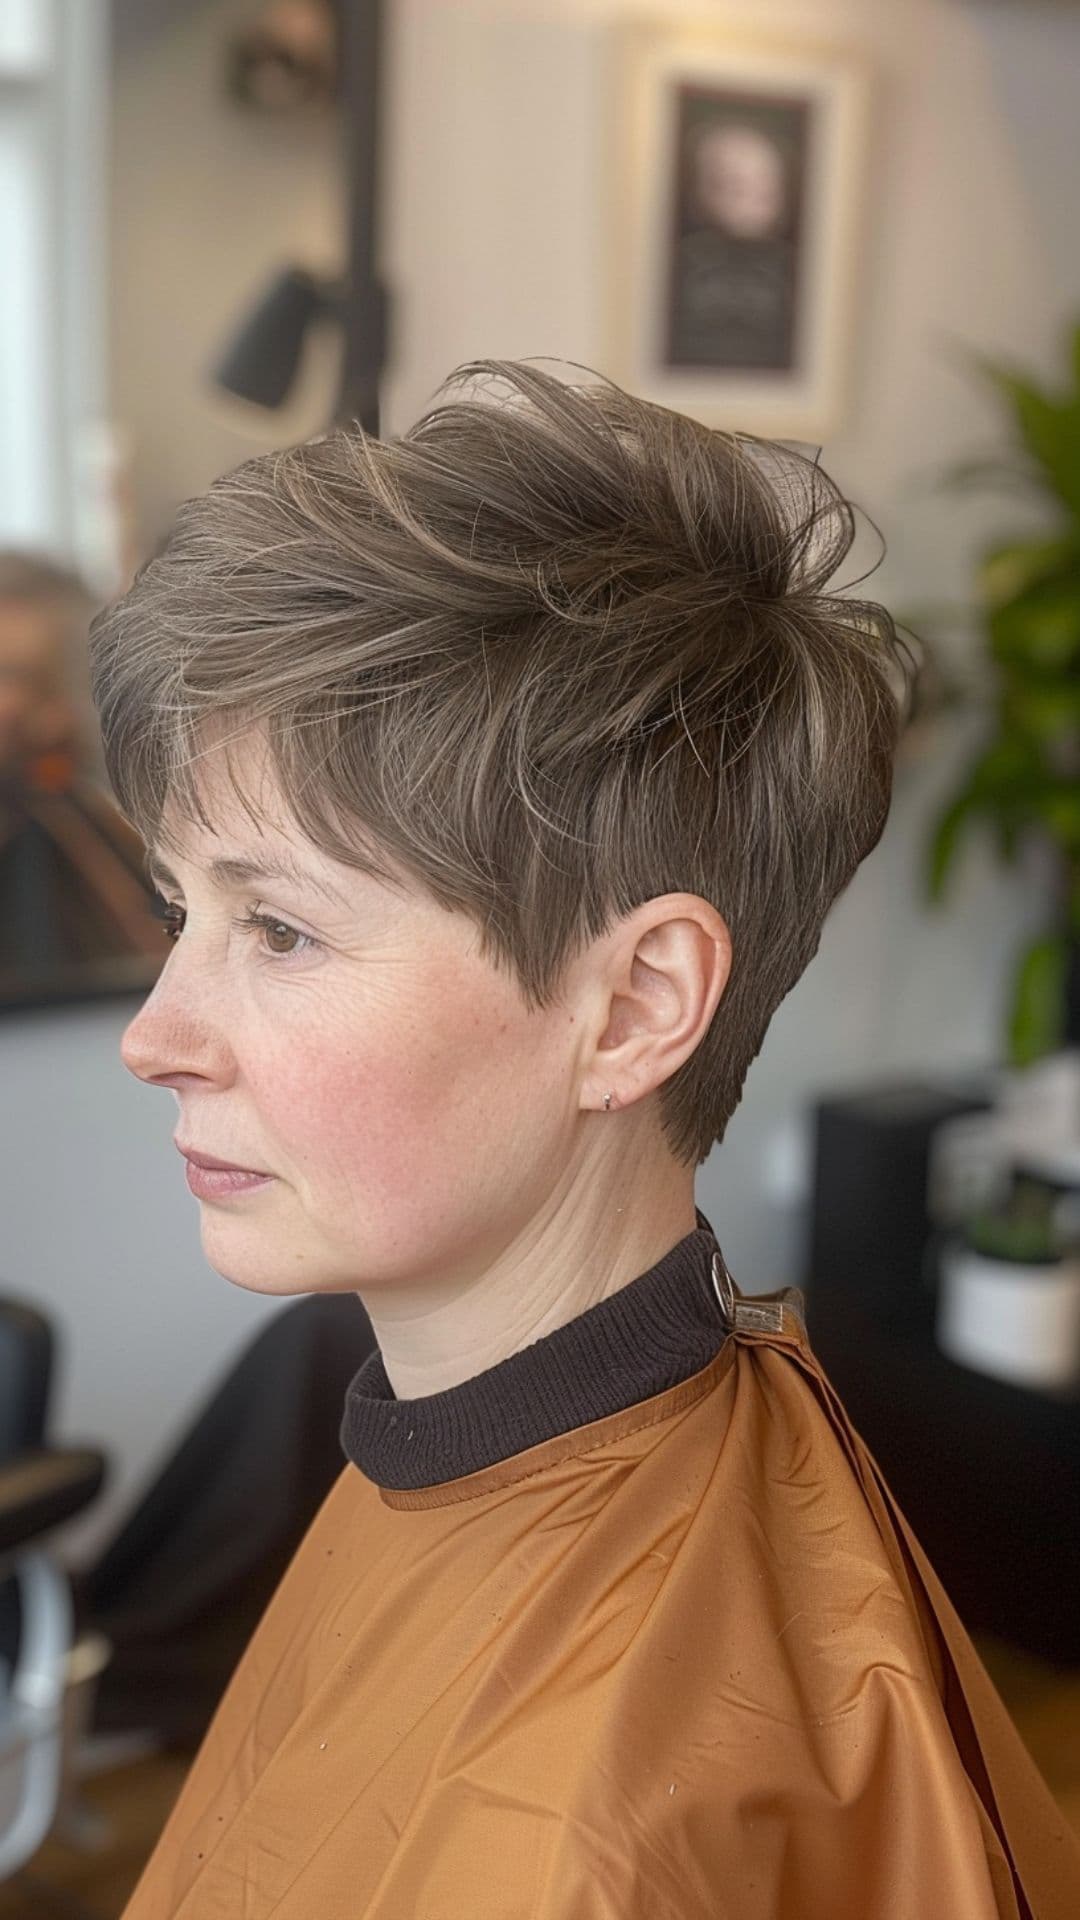 An old woman modelling a short, textured and layered pixie crop.